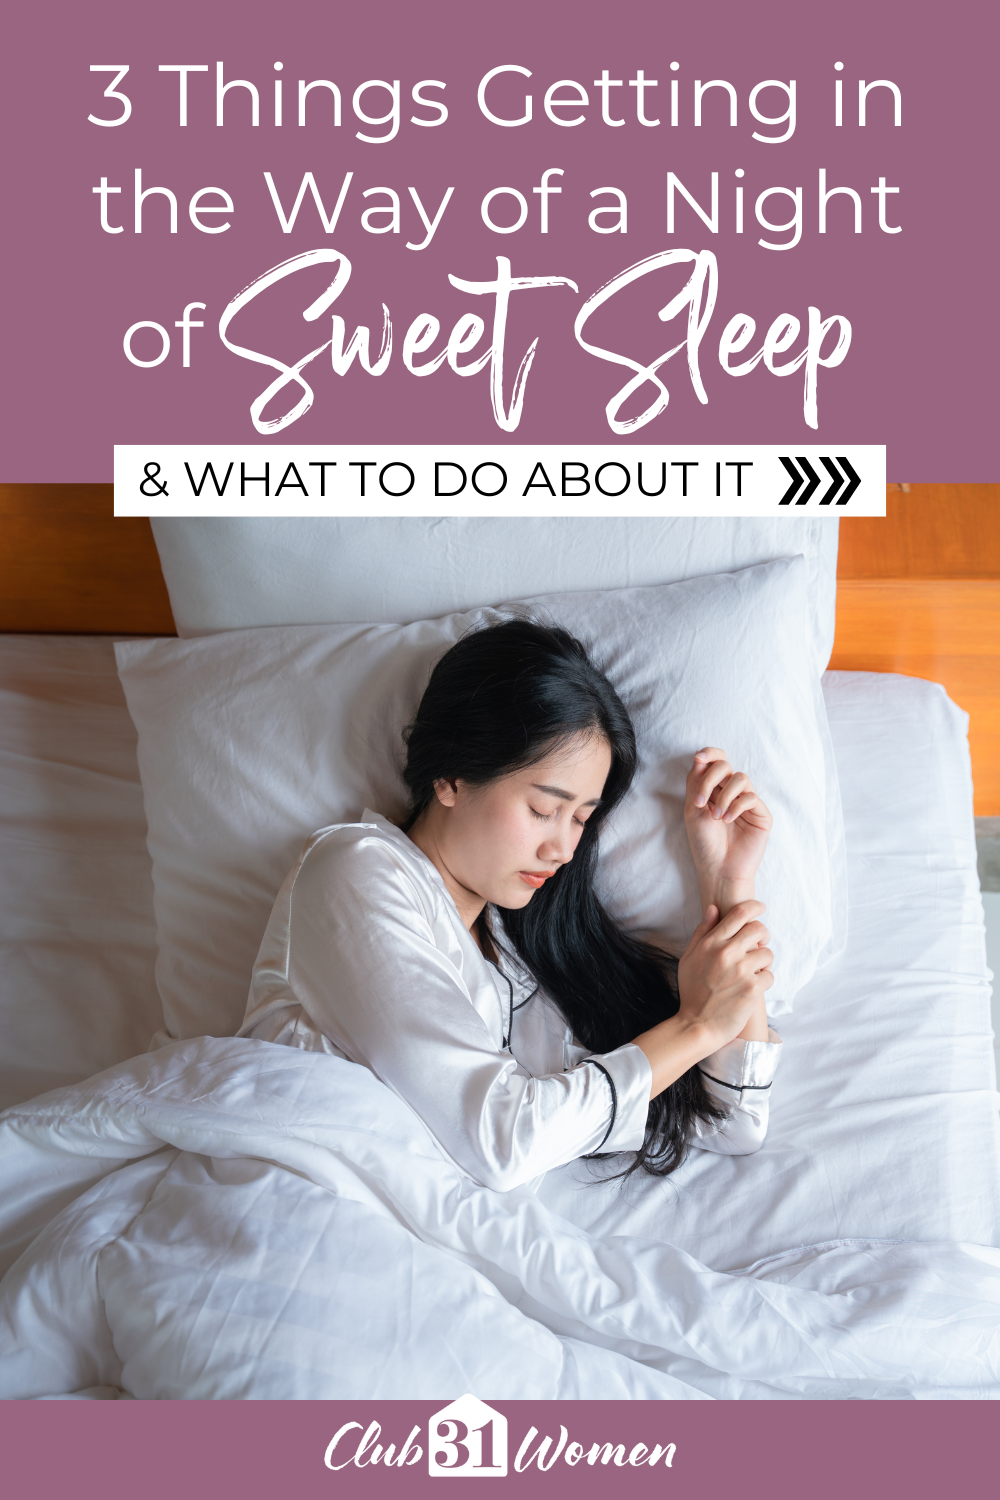 Our bodies were created to need sleep and regular rest. Learn why this is important in the life of a Christian. via @Club31Women